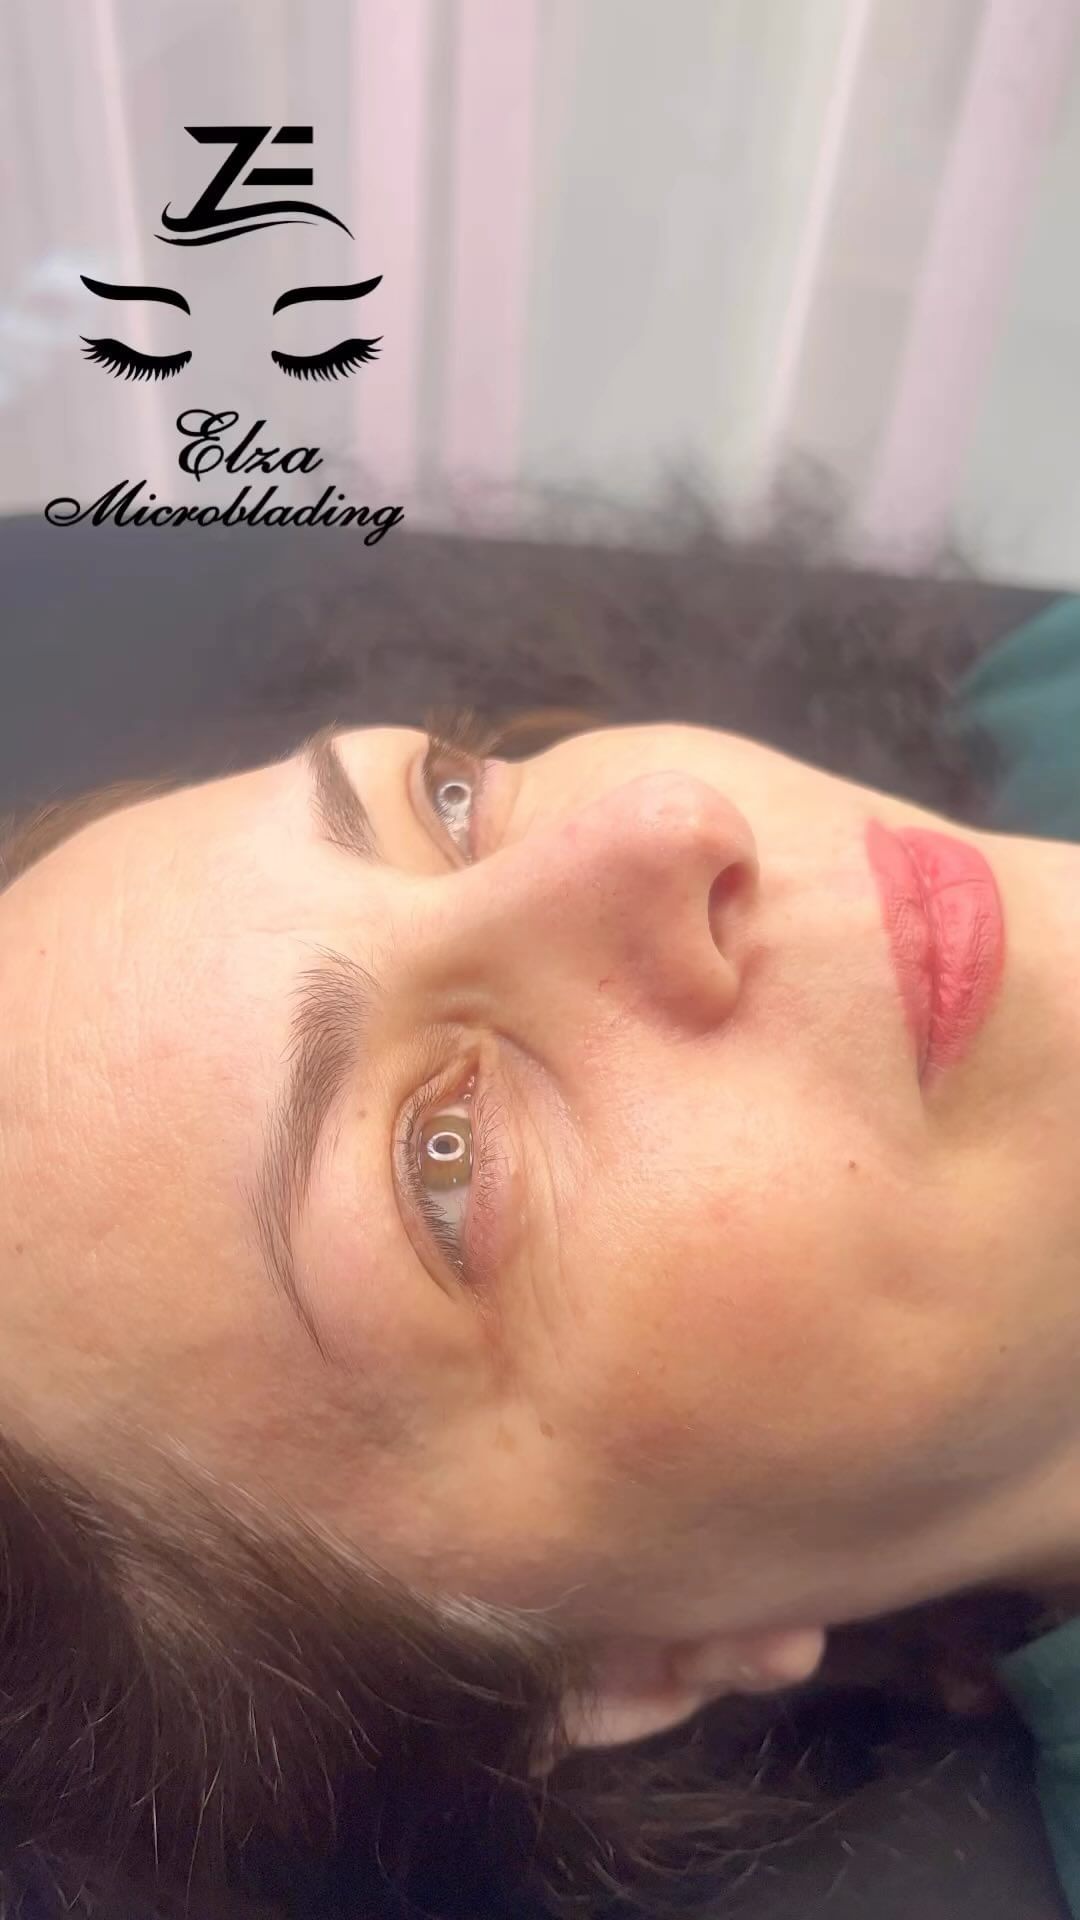 One of the top publications of @microblading_master_elza which has 25 likes and 3 comments